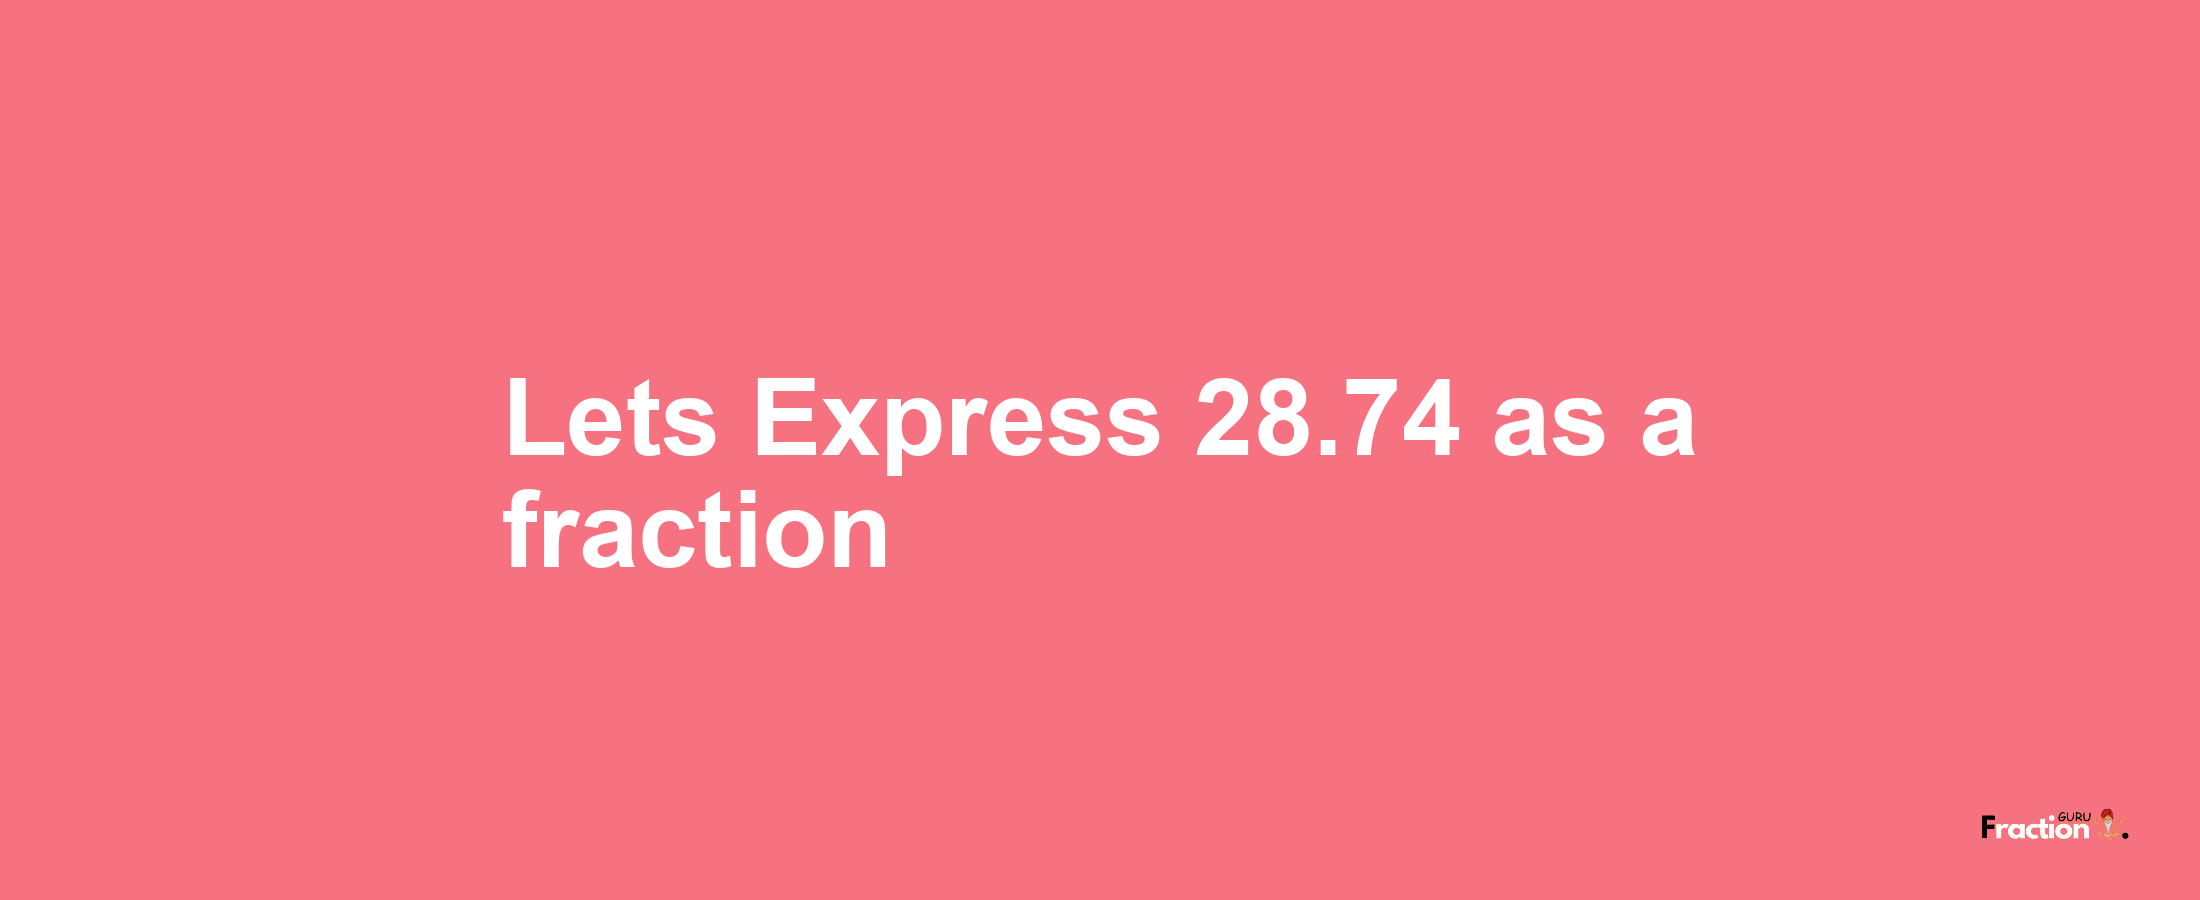 Lets Express 28.74 as afraction